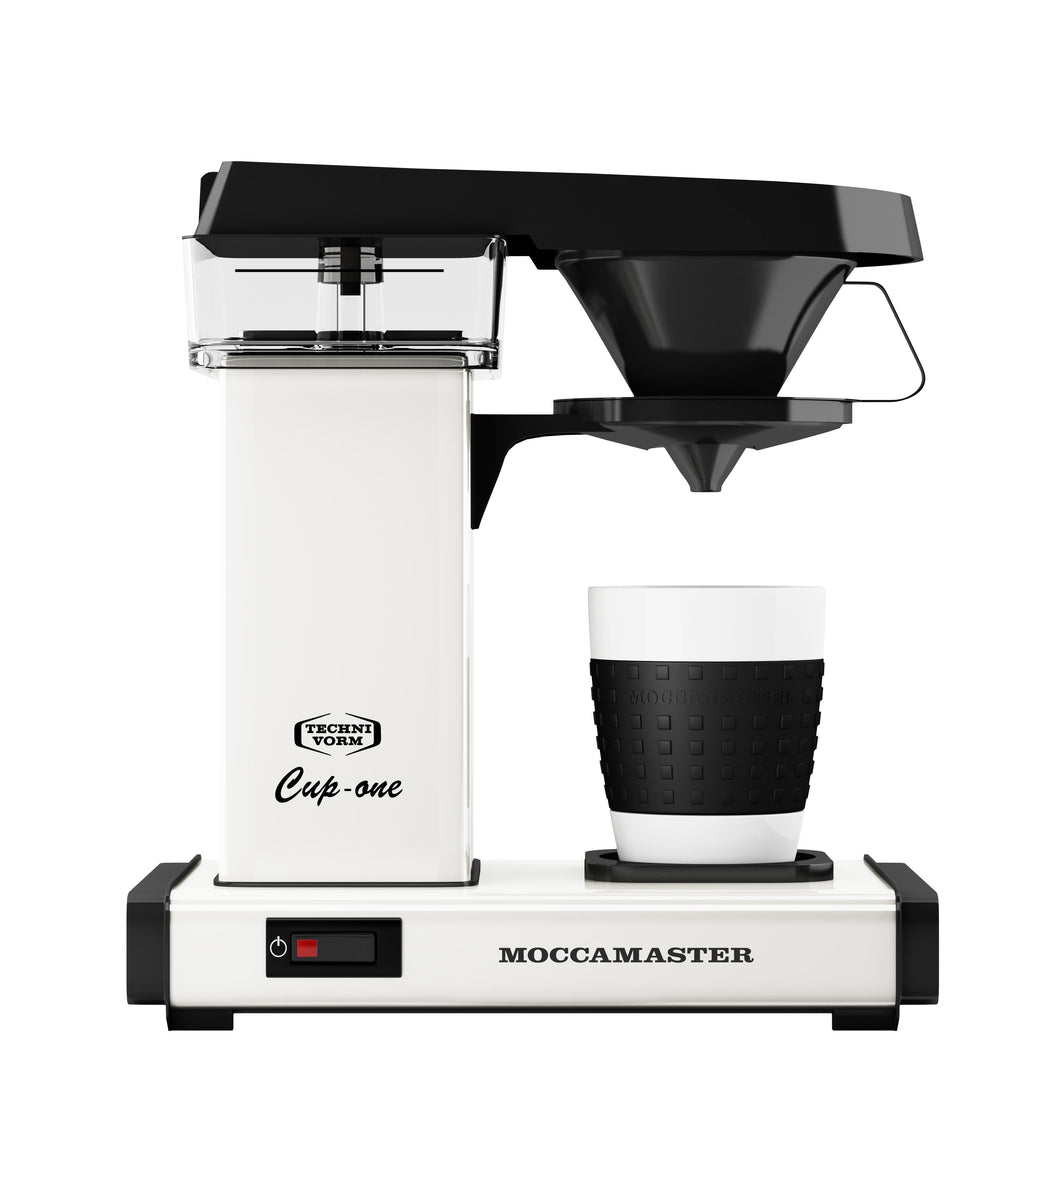 Moccamaster Cup-one Filterkaffeemaschine Off-White